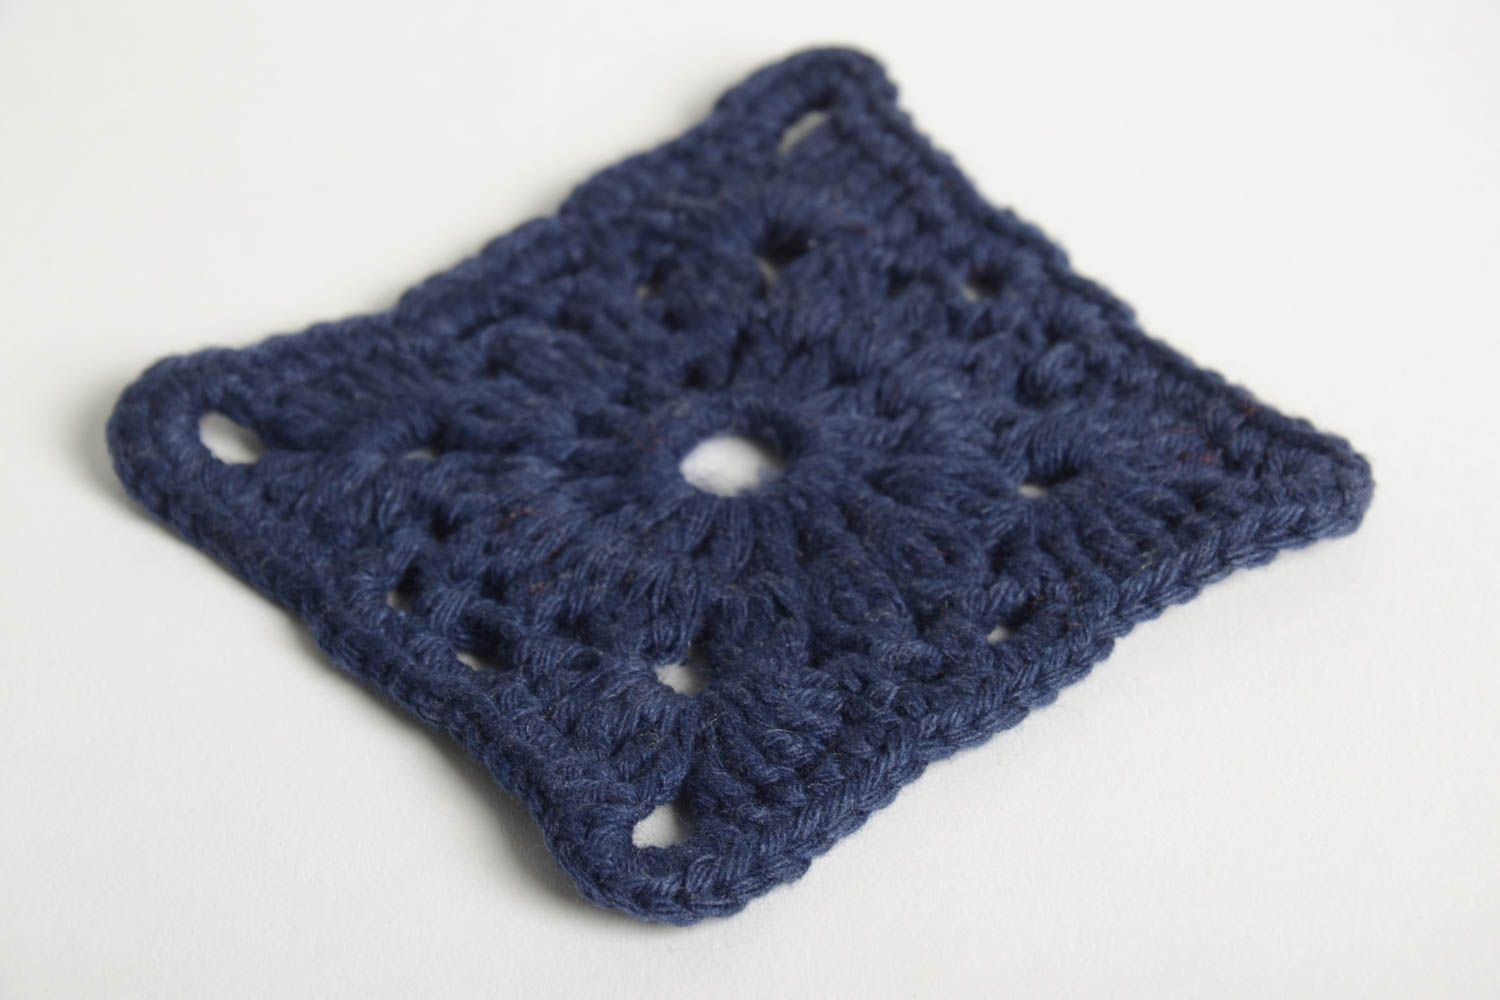 Unusual handmade crochet lace coaster hot pads kitchen supplies small gifts photo 3